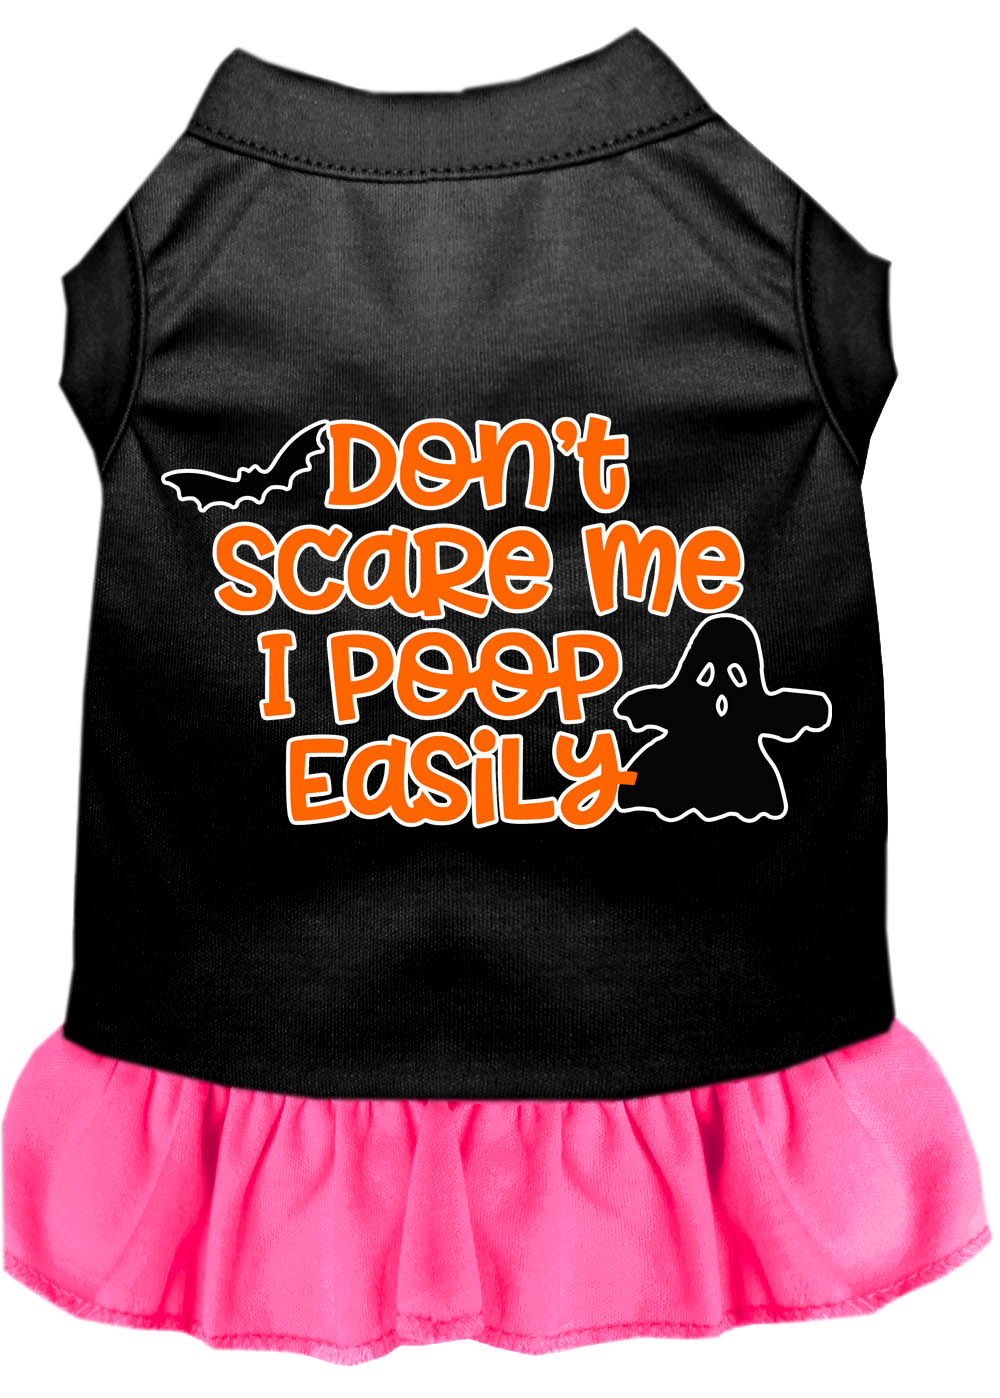 Don't Scare Me, Poops Easily Screen Print Dog Dress Black with Bright Pink Med